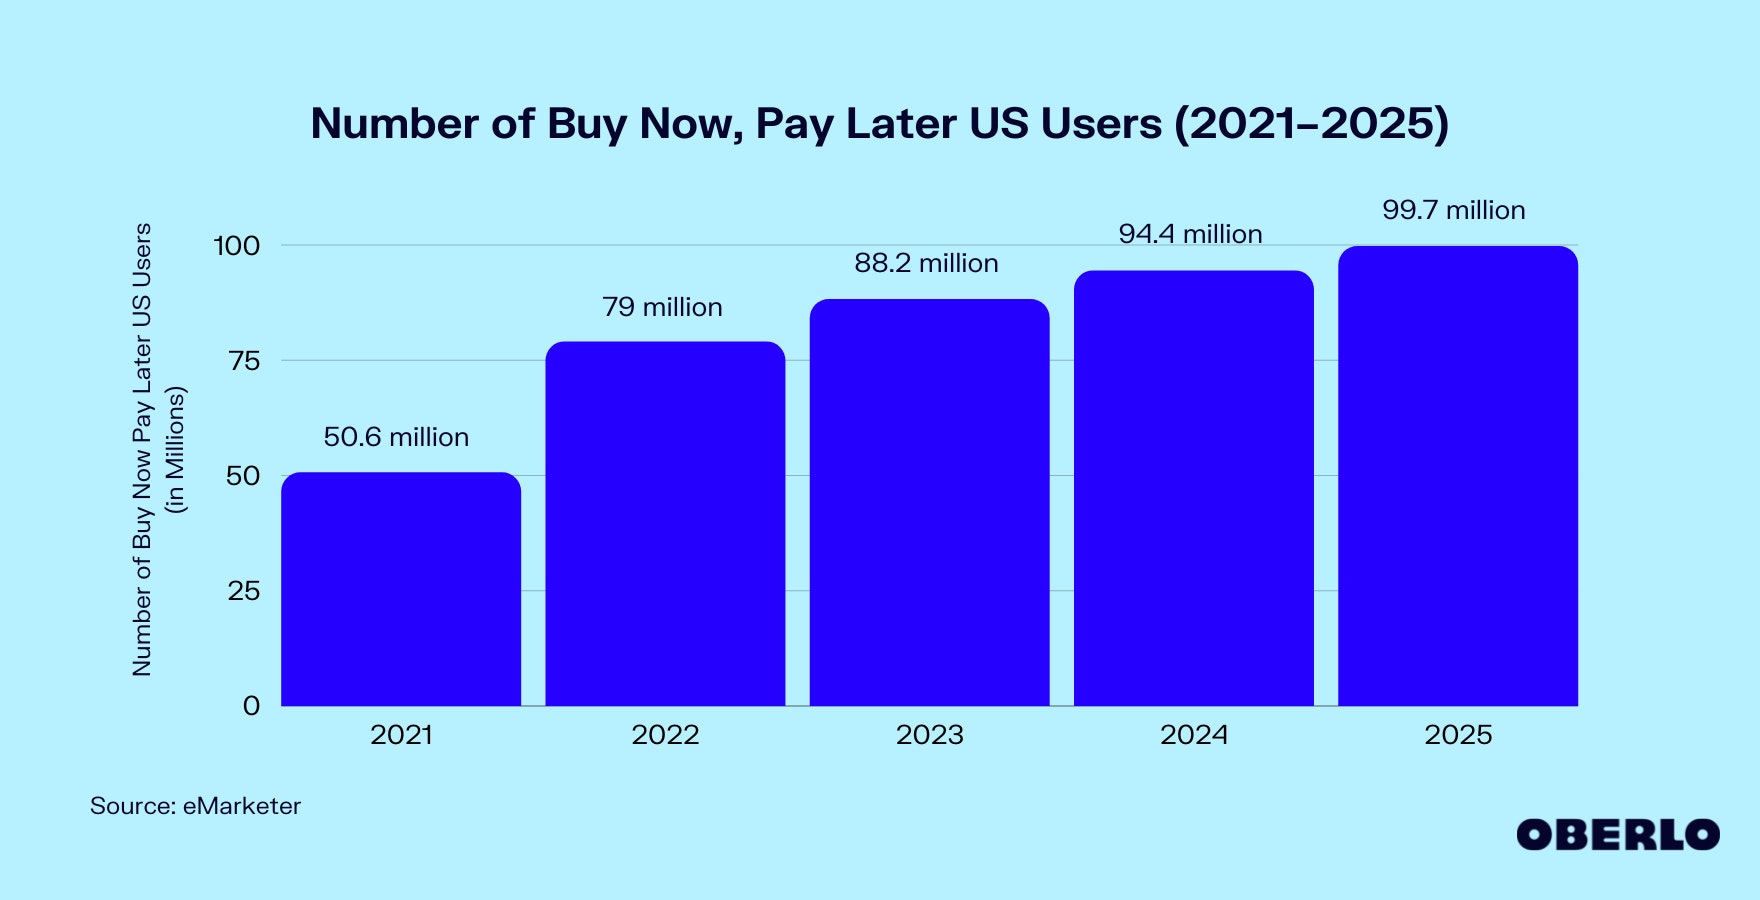 Chart of the Number of Buy Now, Pay Later US Users